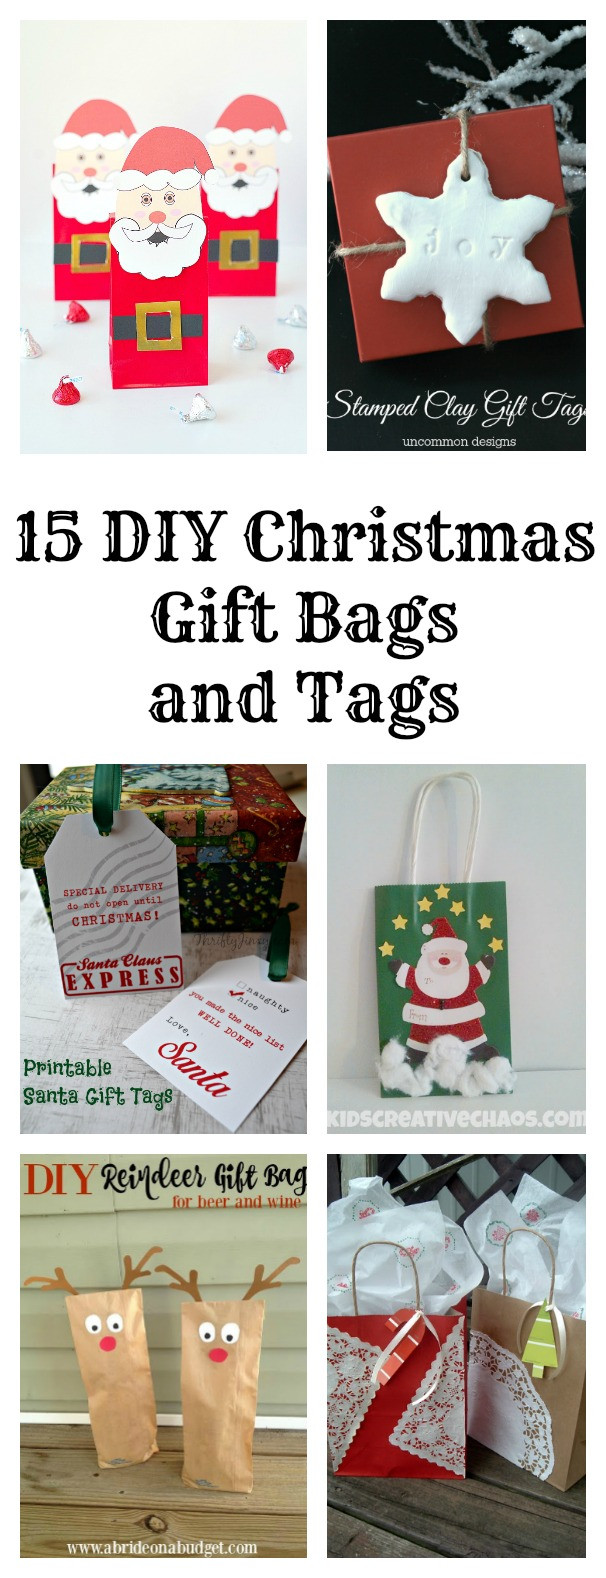 DIY Christmas Gift Bags
 DIY Christmas Gift Bags Val Event Gal